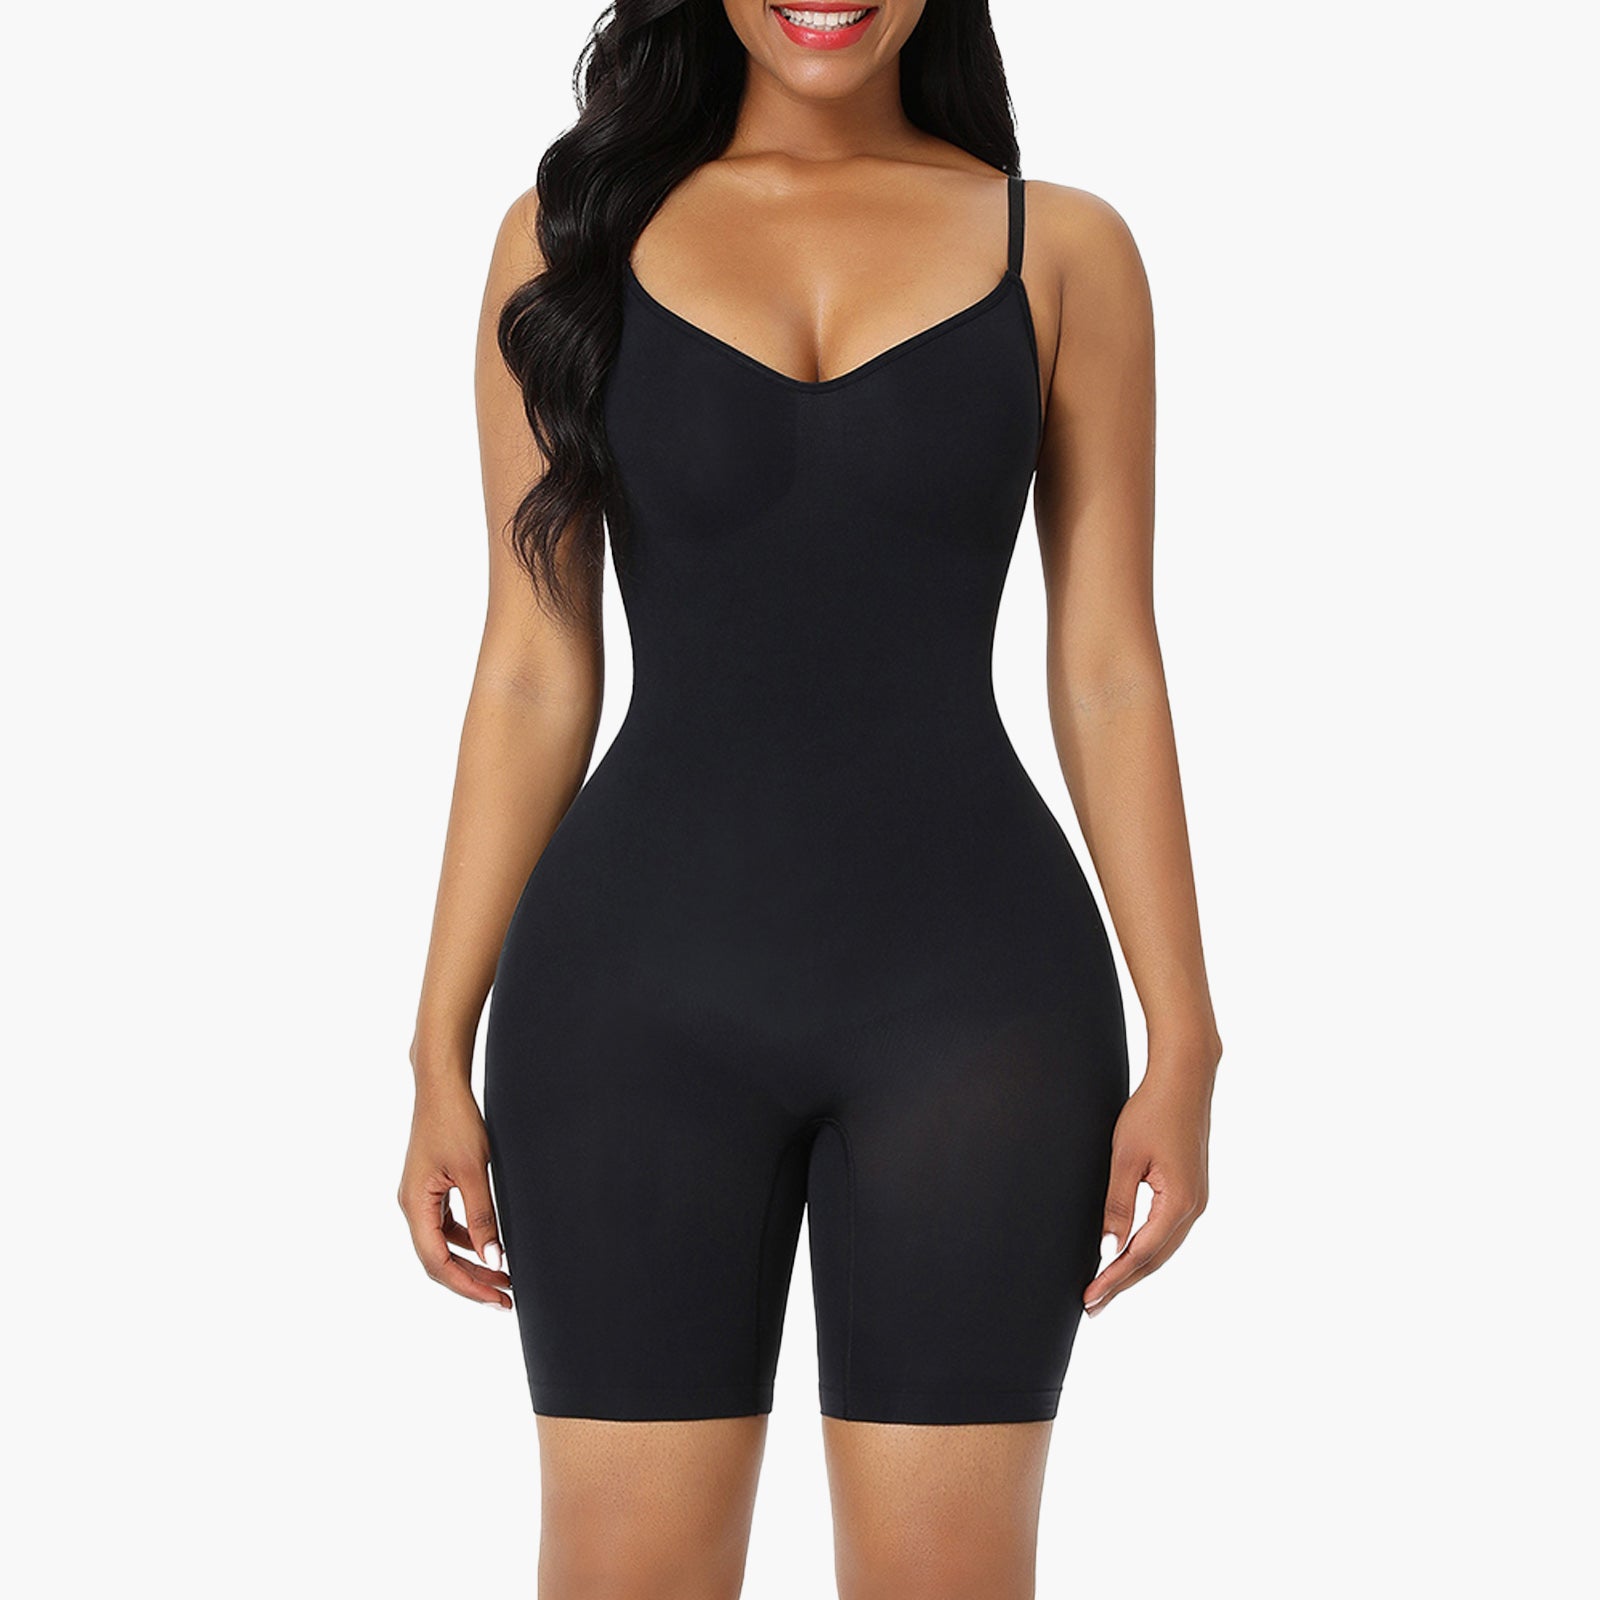 GluteLifting Mid-Thigh Bodysuit w/Front Closure & High Back (BE13)